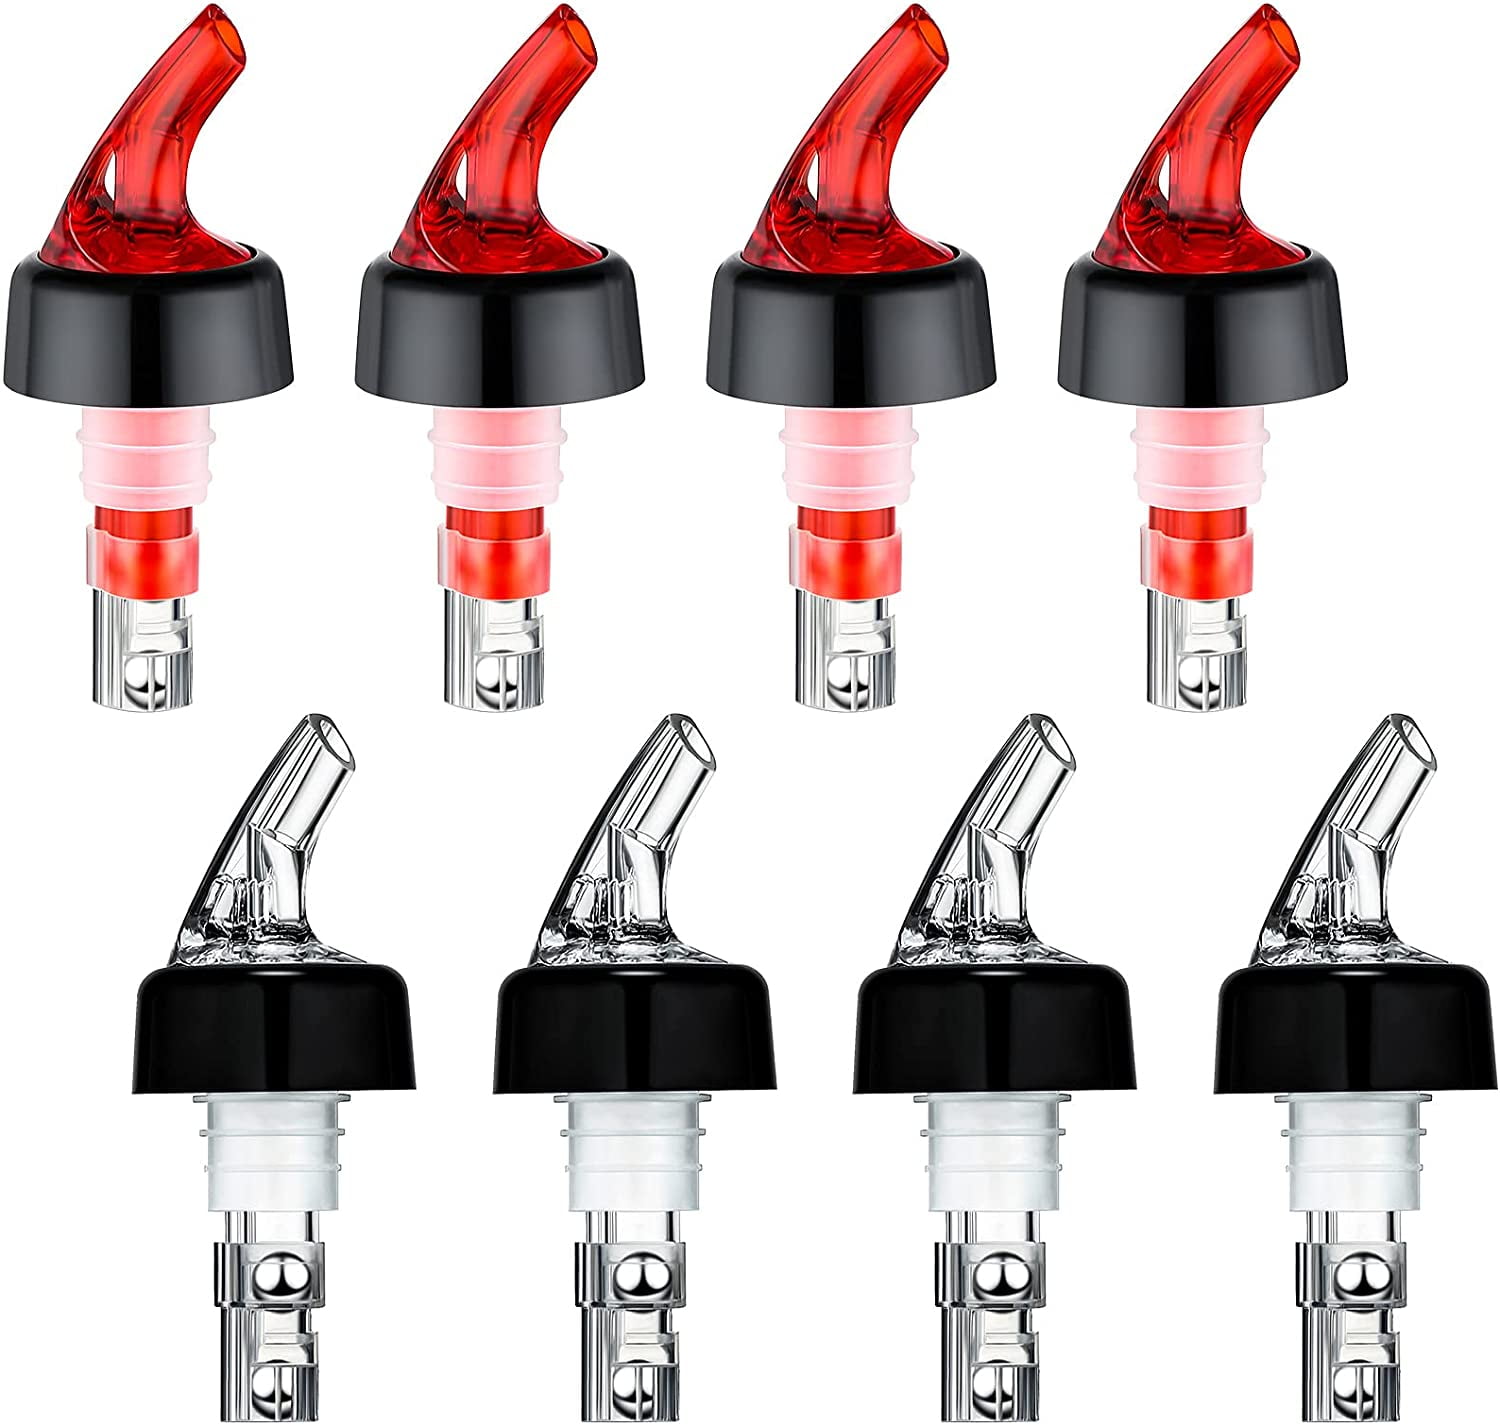 10 Caps Automatic Measured Bottle Pourer Clear Spout with White Tail 1oz/30 ml 